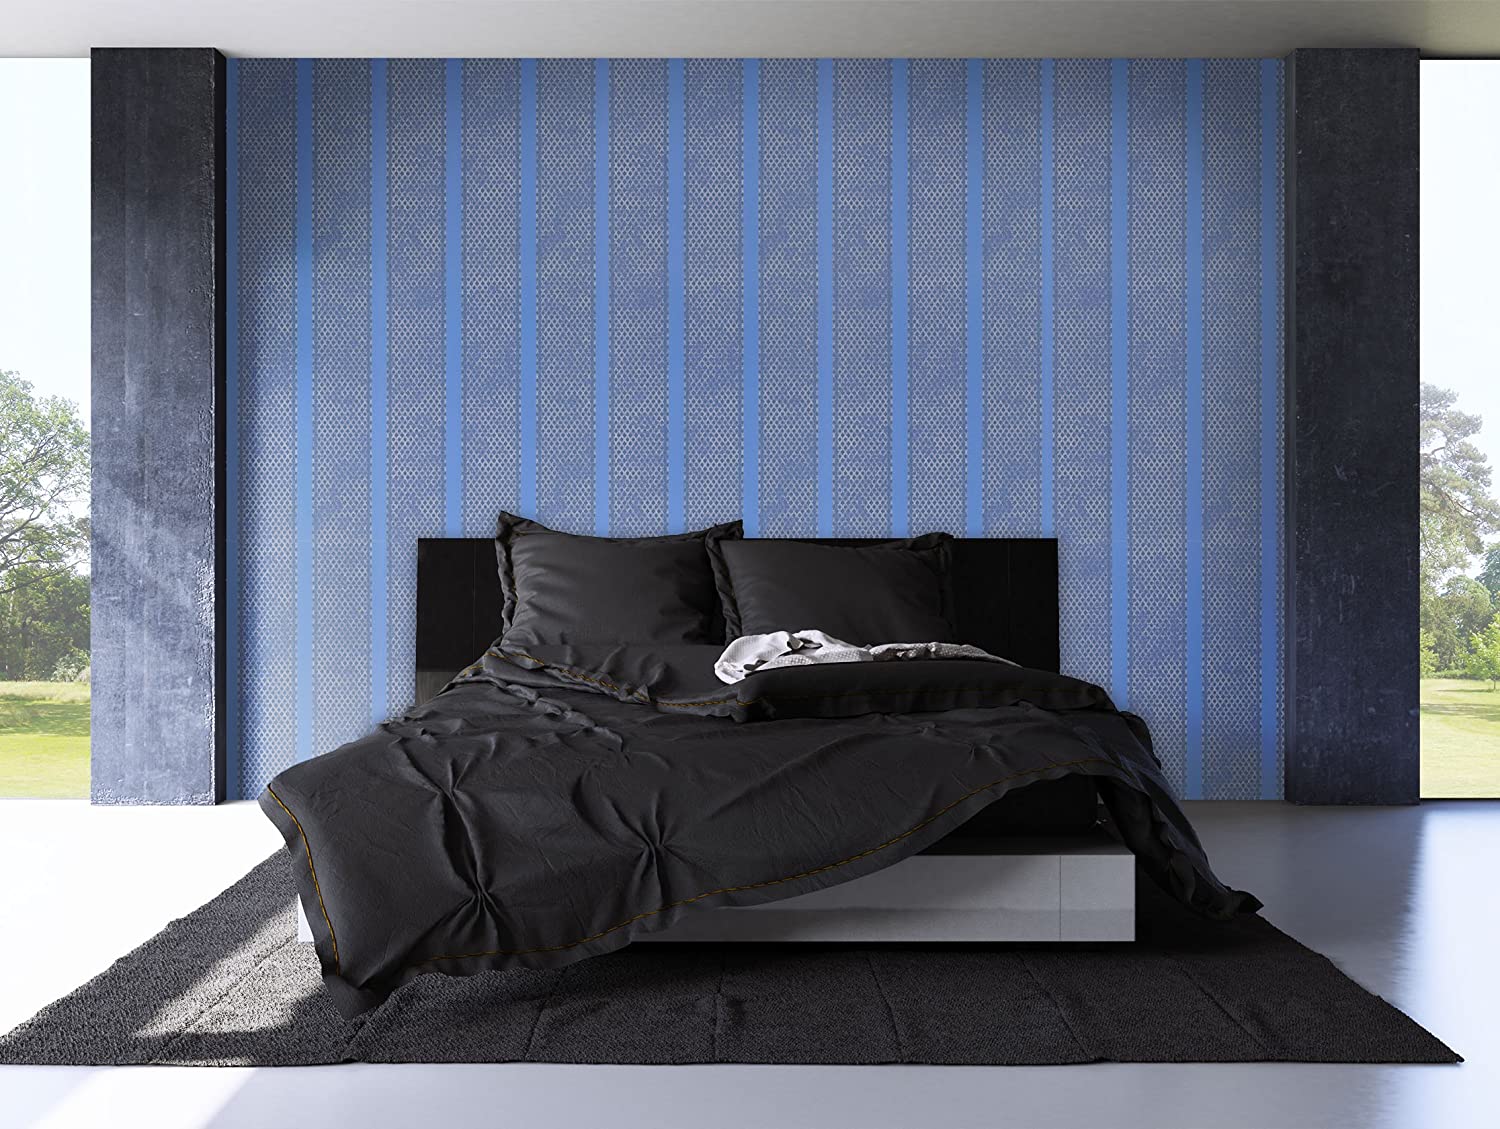 Newroom Wallpaper Stripes Blue Striped Modern Stripes Wallpaper Border Non-Woven Striped Wallpaper Country House incl. Wallpaper Guide/Stripes